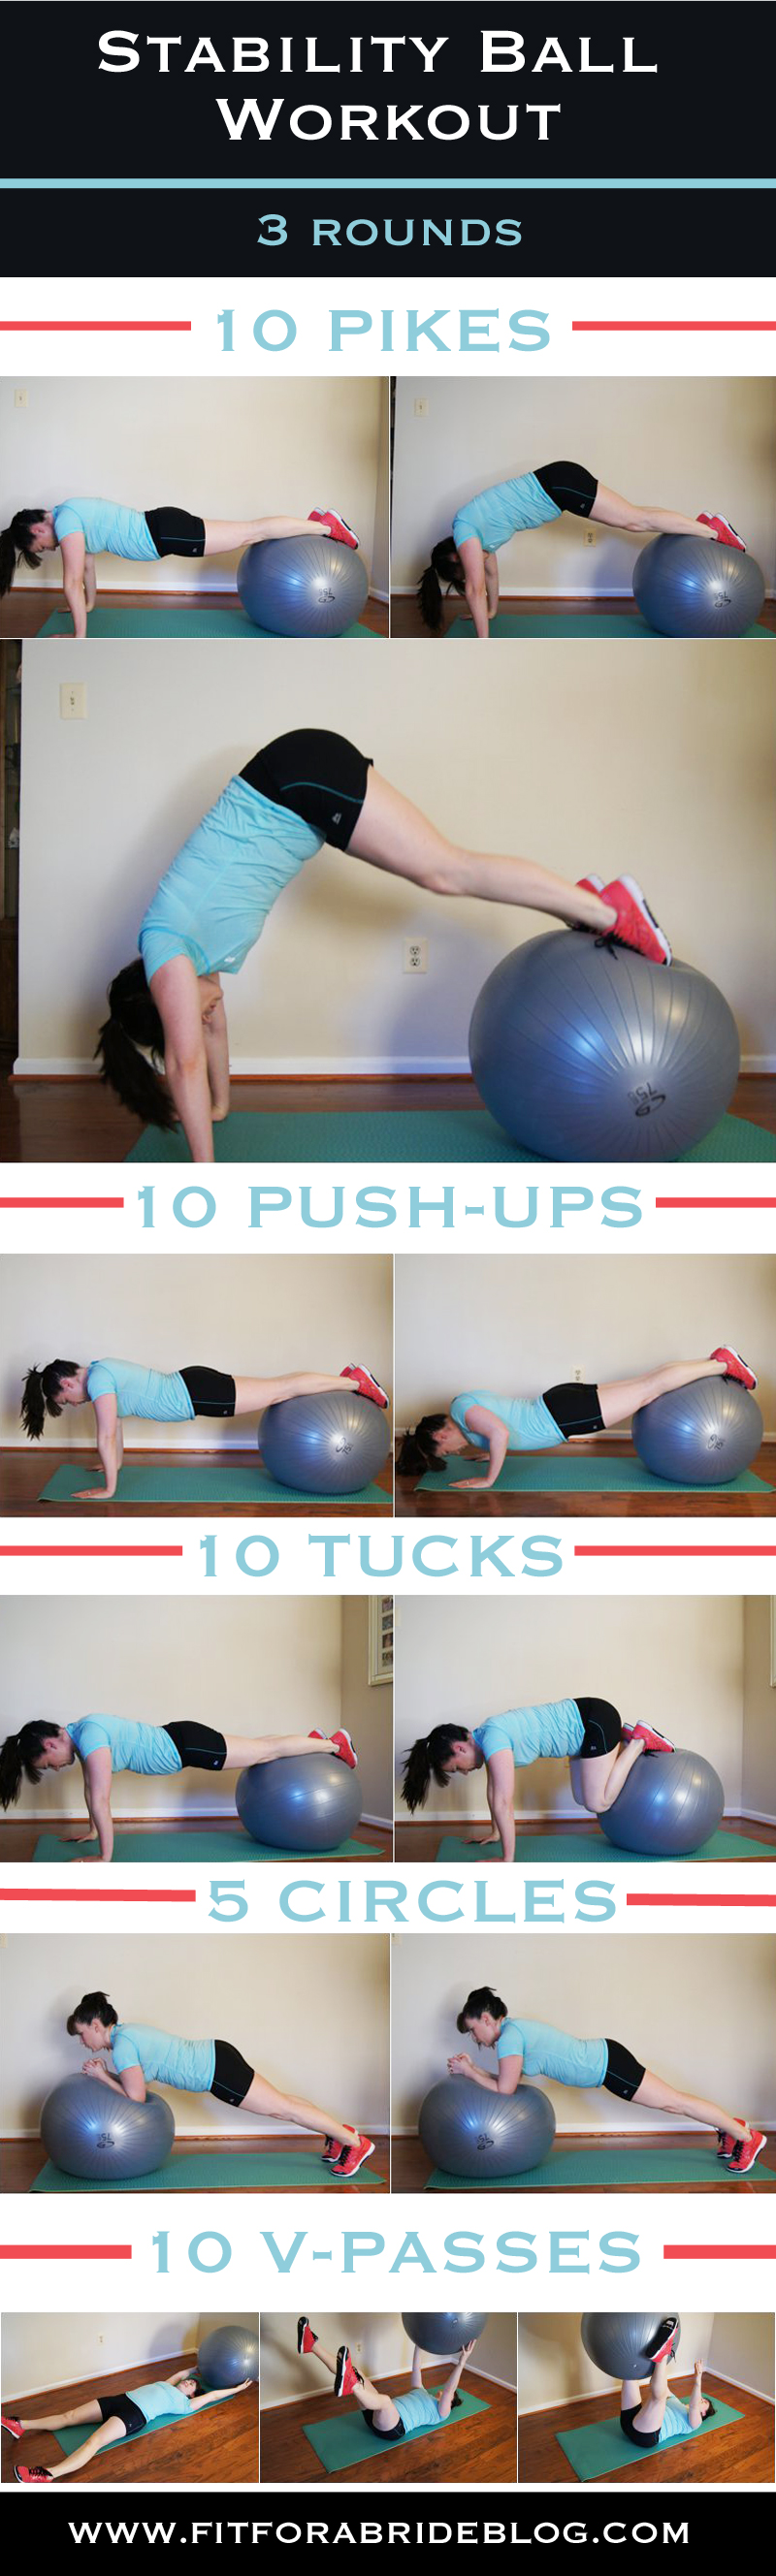 Stability-Ball-Workout